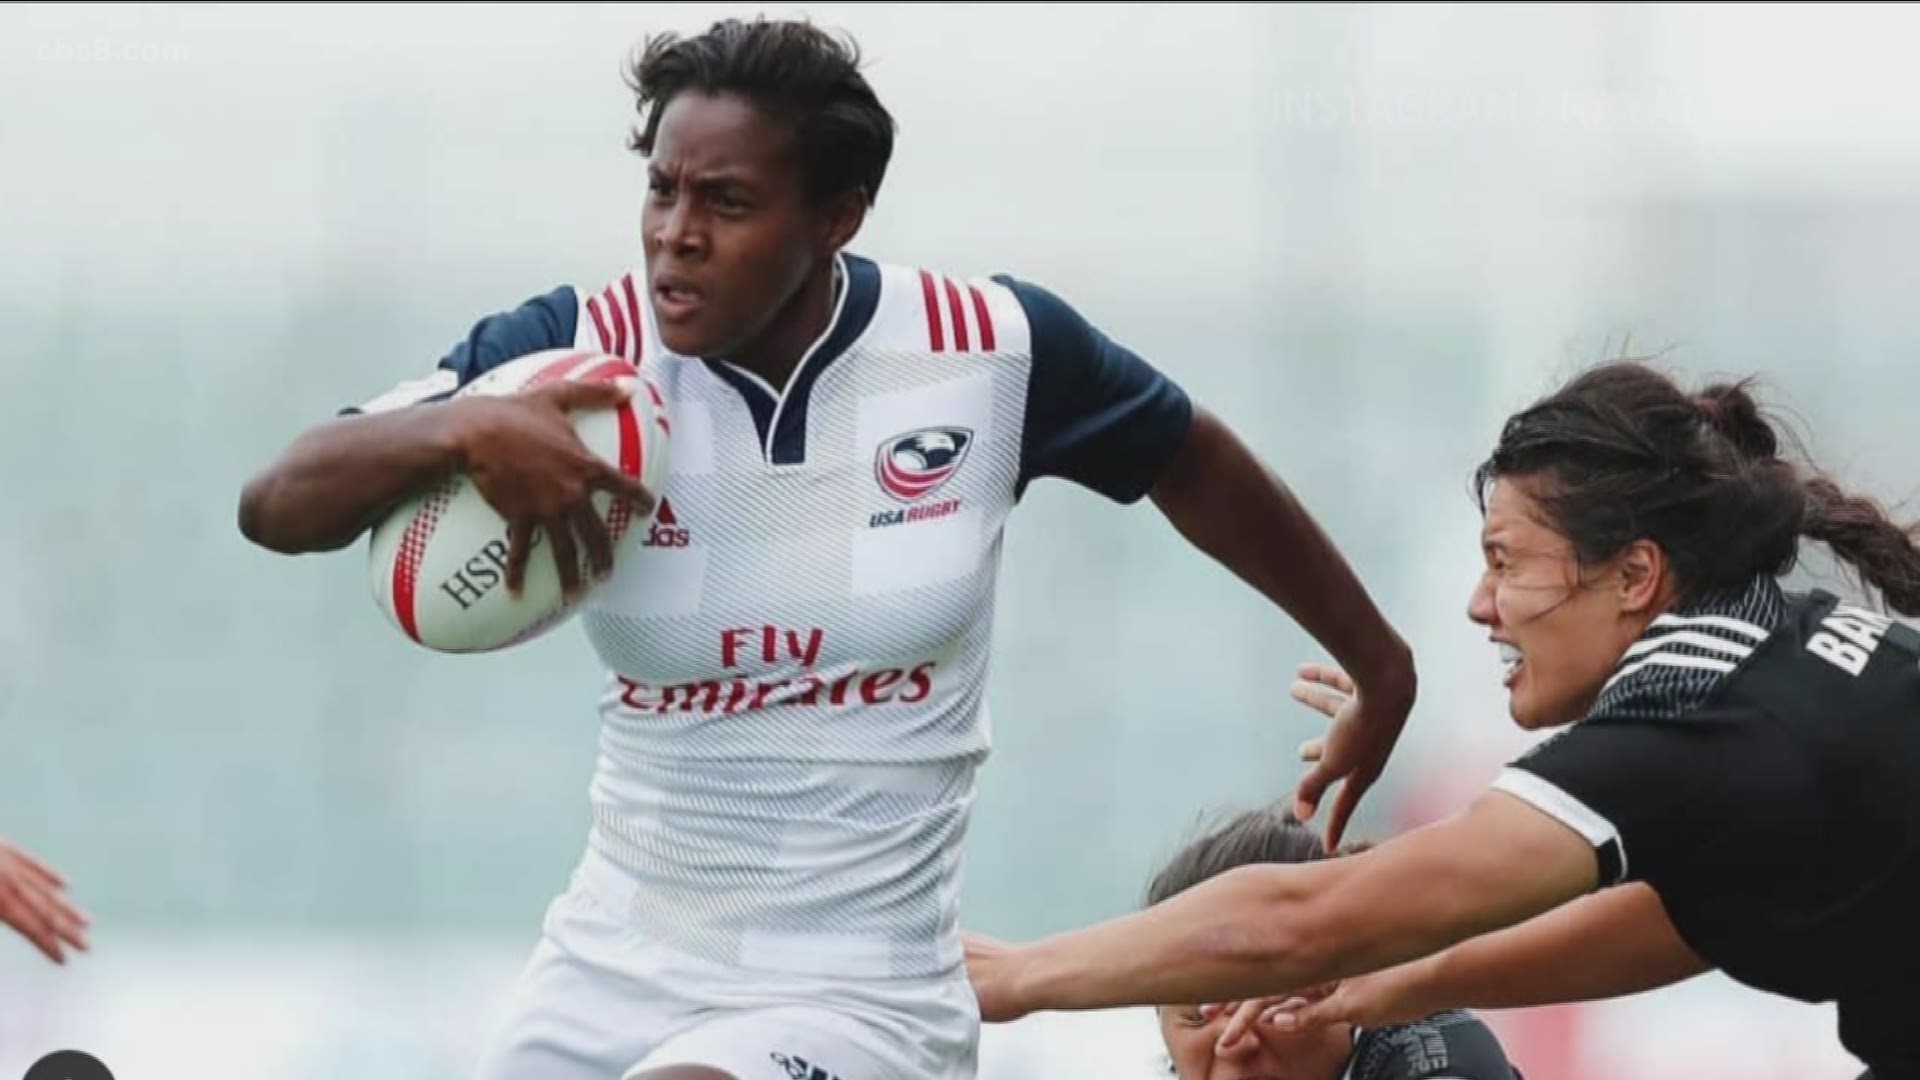 Two members of USA 7's Rugby Team said public health is more important than the games.